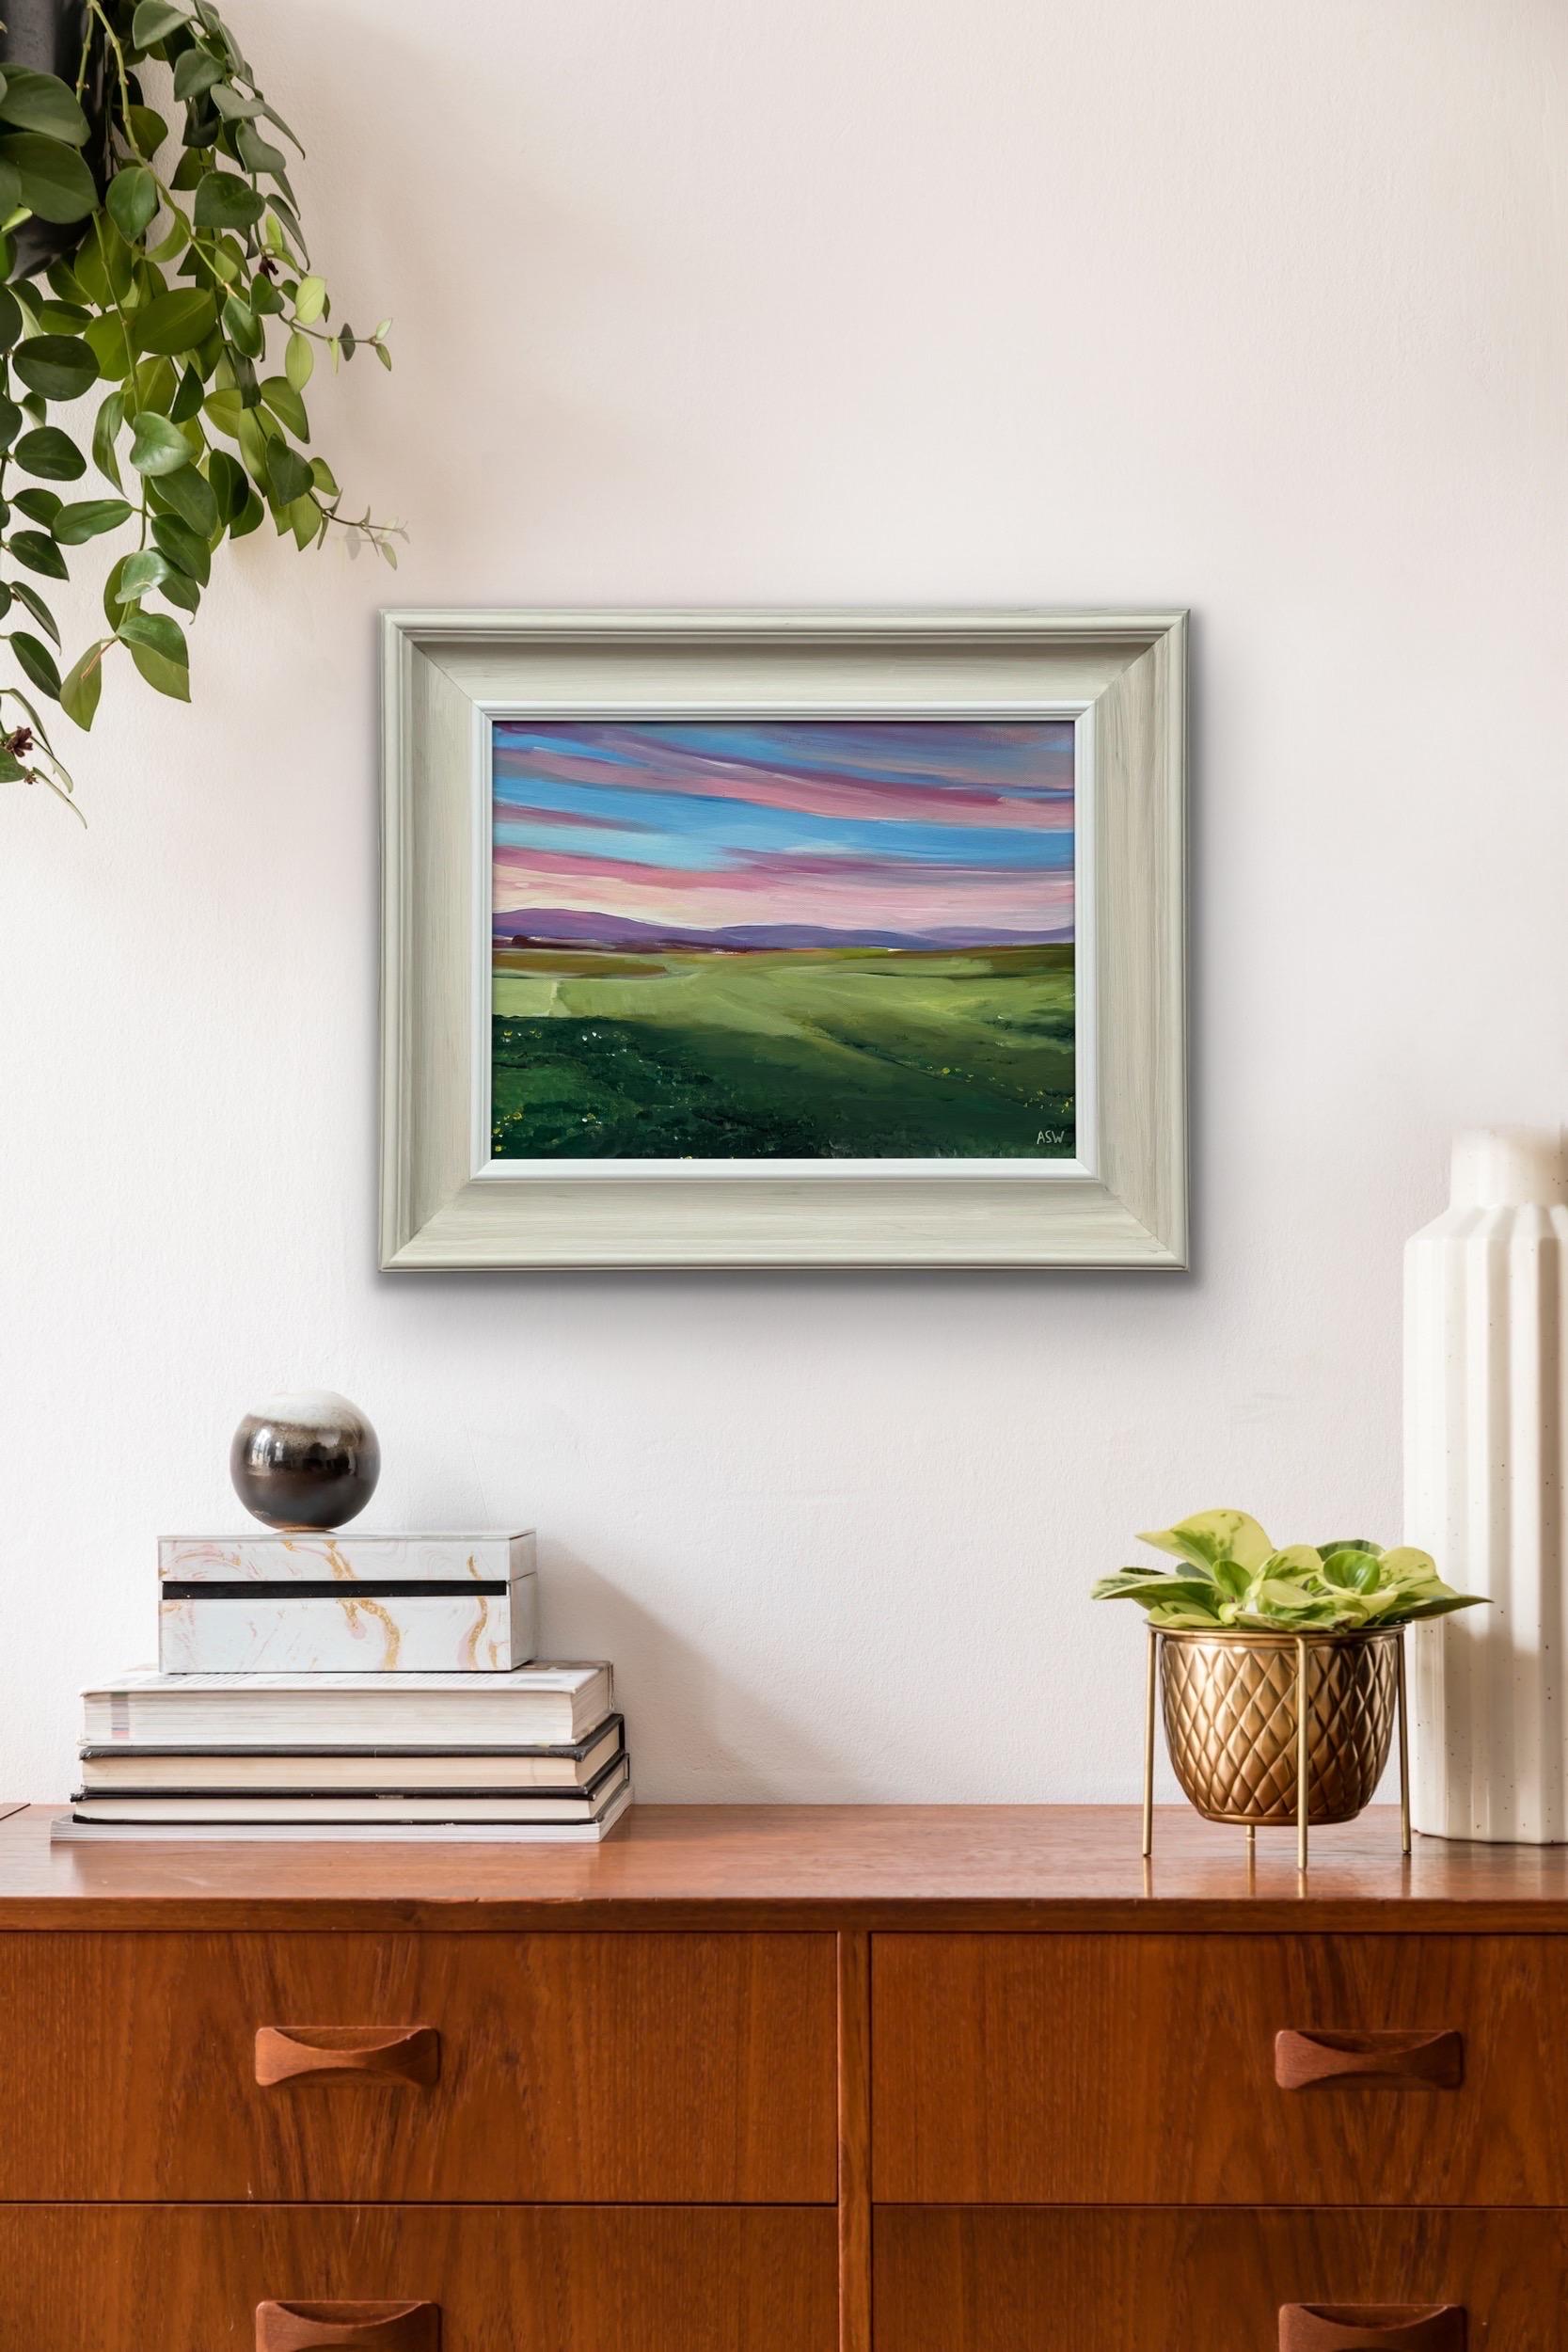 Sunset at Brora Golf Course in the Scottish Highlands by Contemporary British Artist, Angela Wakefield. This unique original depicts a pink & blue sky with purple hills at sunset on the east coast of Scotland. 

Art measures 16 x 12 inches 
Frame